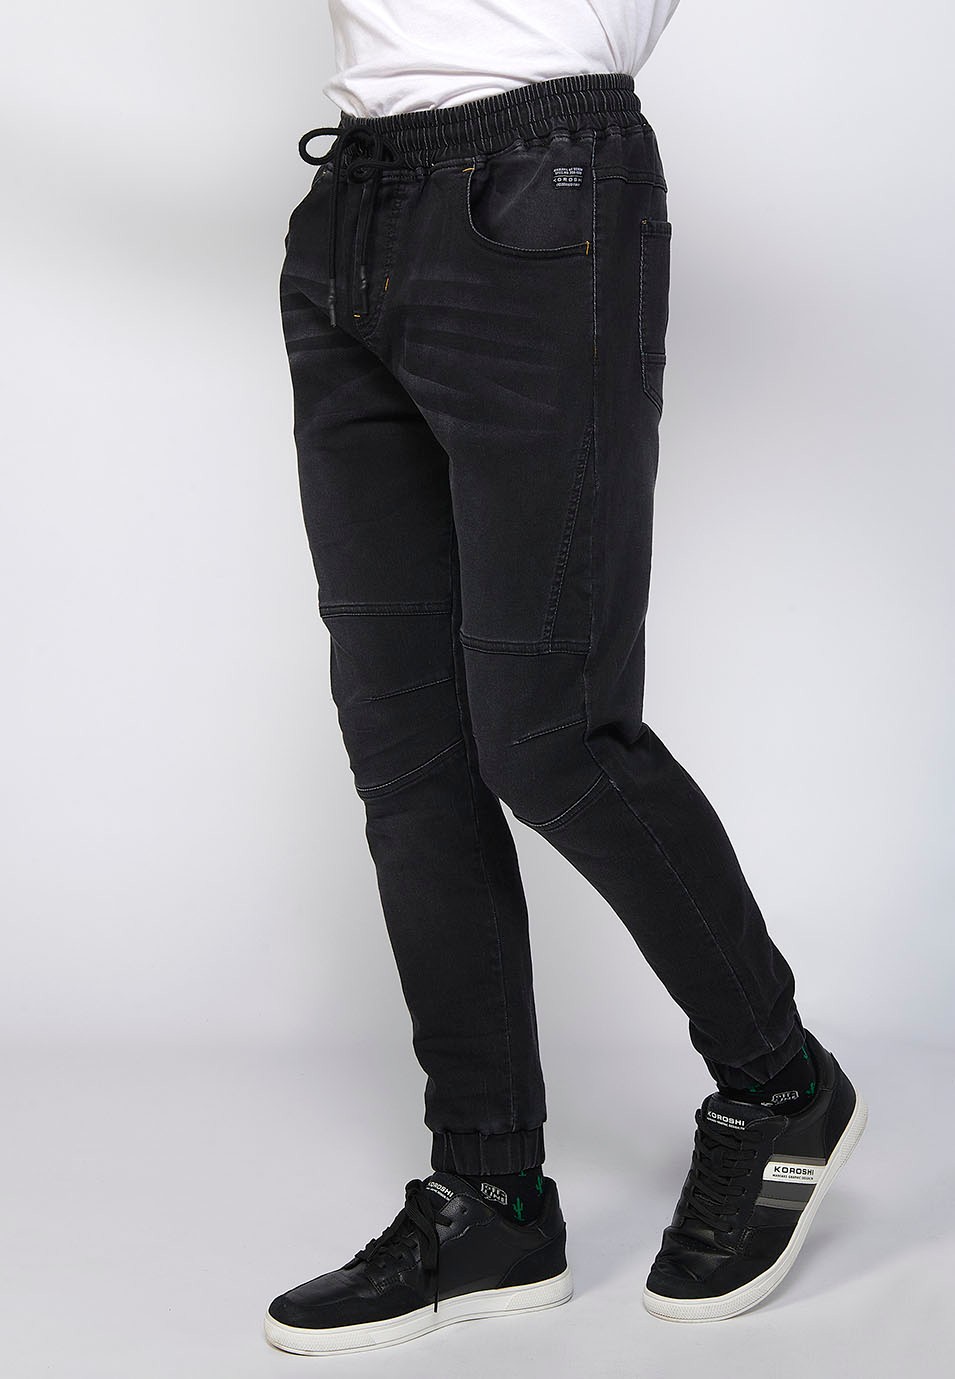 Long slim jogger pants fitted at the ankles with adjustable elastic waist and drawstring in Black for Men 2